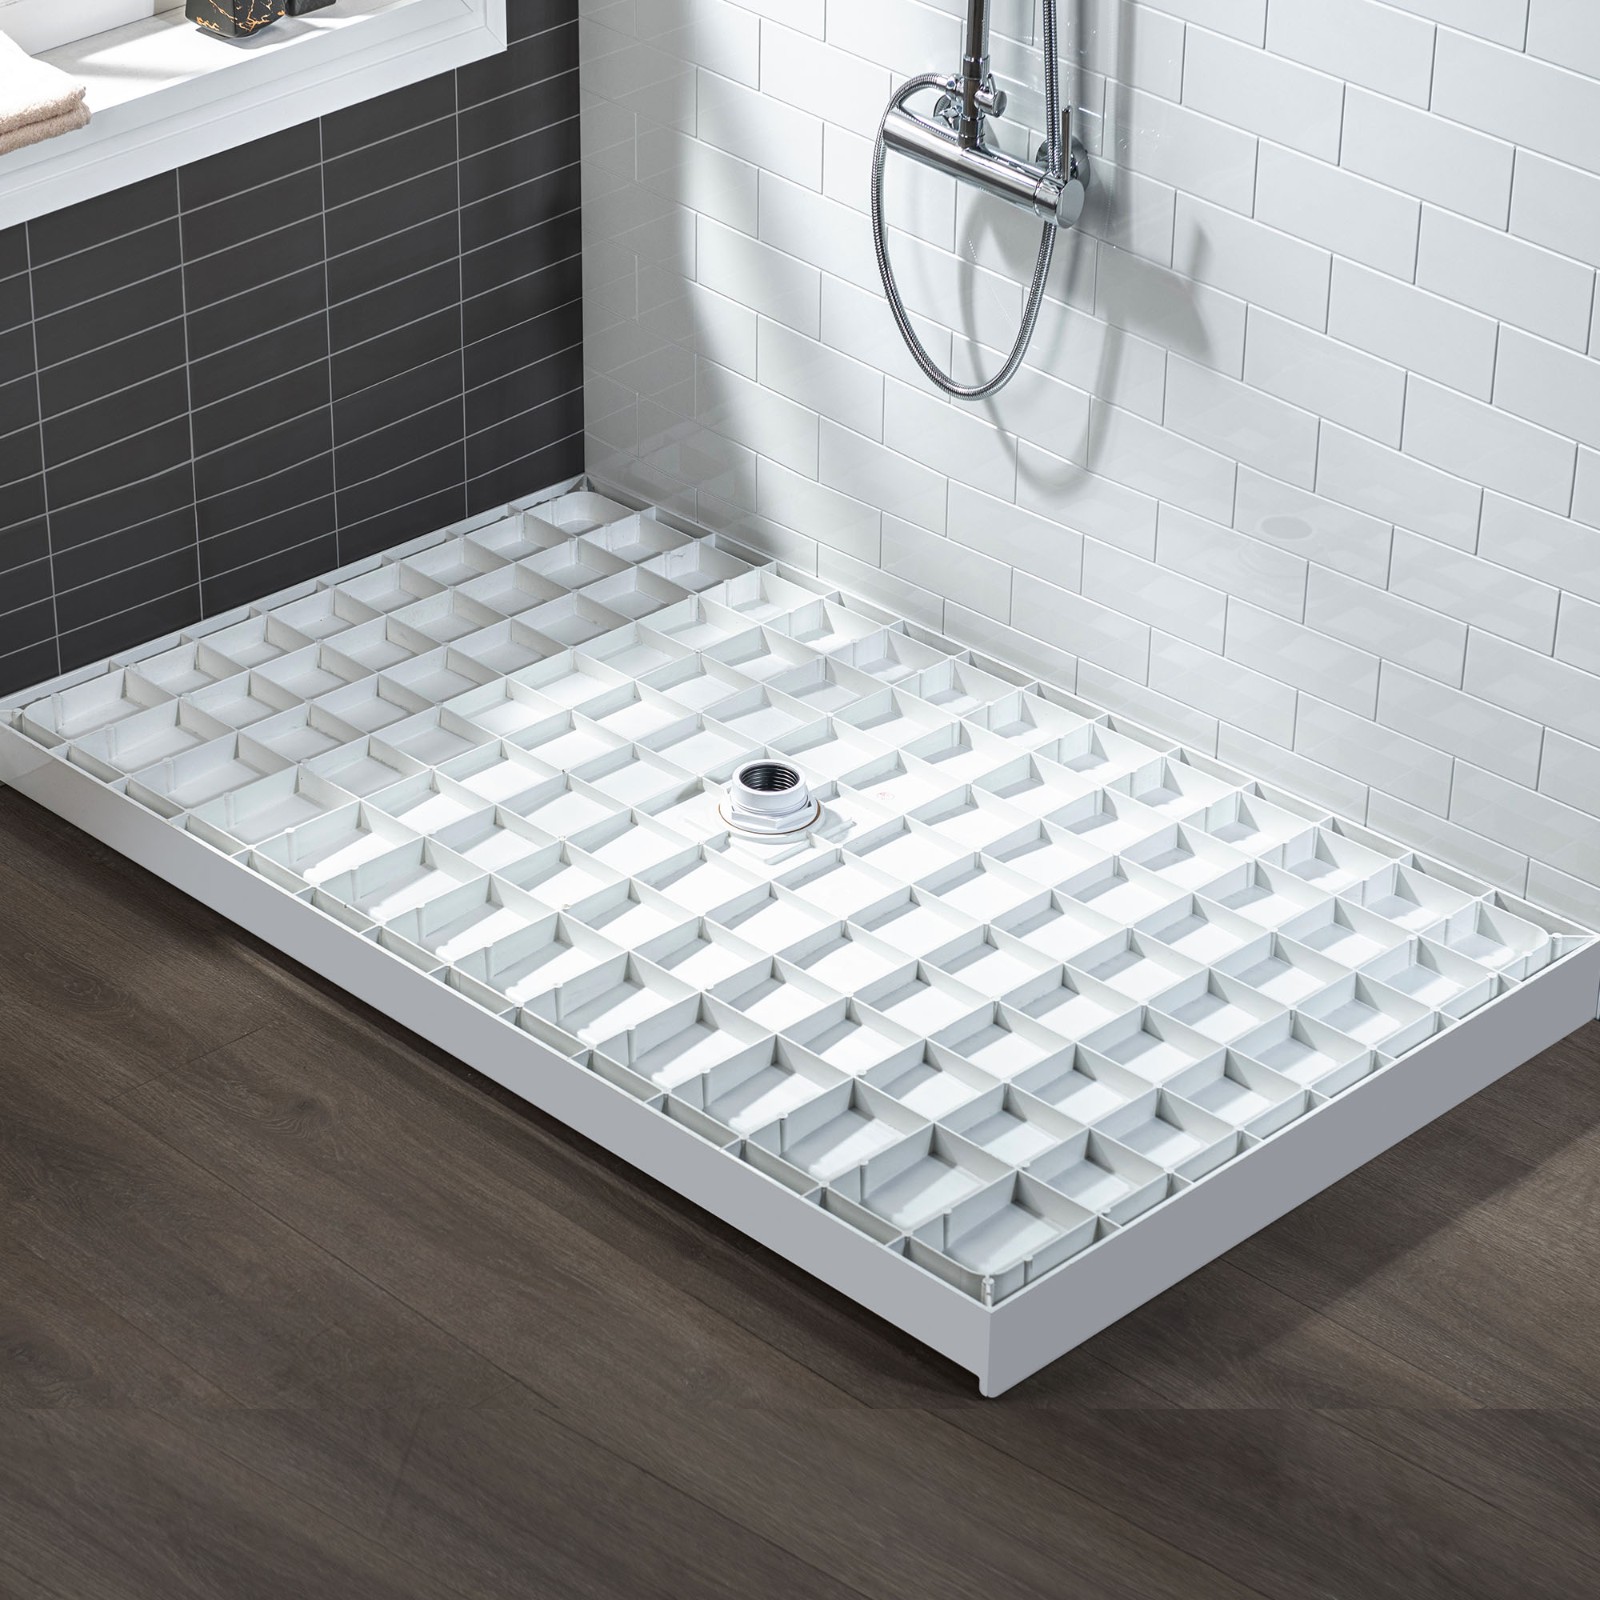  WOODBRIDGE SBR4832-1000C-CH SolidSurface Shower Base with Recessed Trench Side Including  Chrome Linear Cover, 48